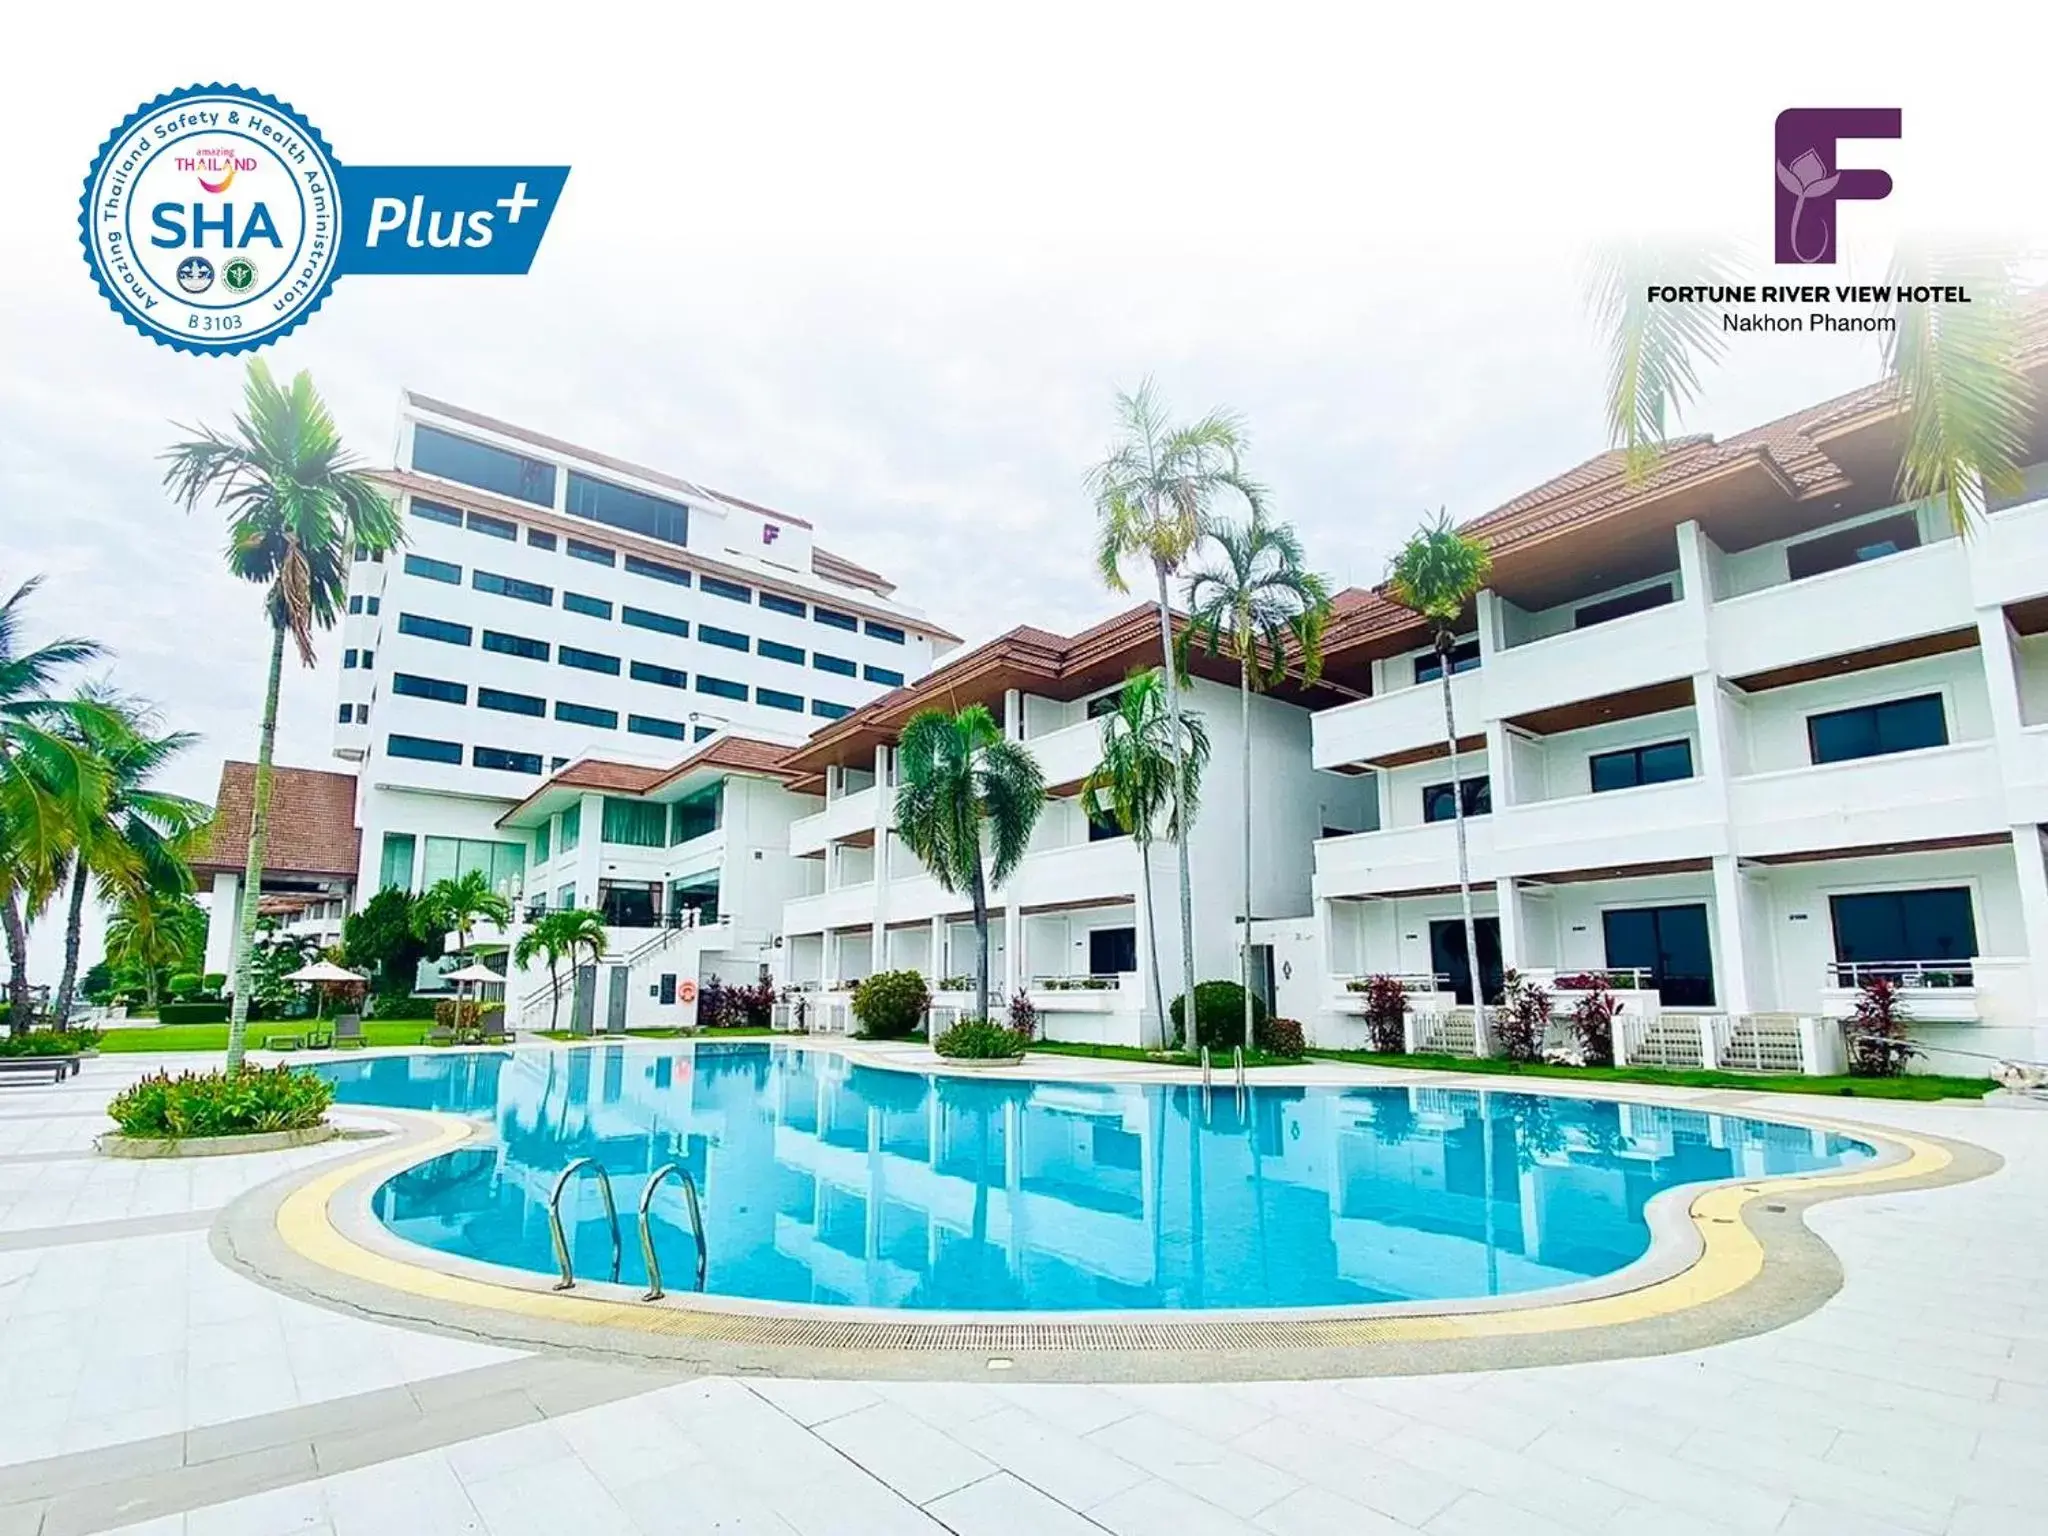 Swimming pool, Property Building in Fortune River View Hotel Nakhon Phanom